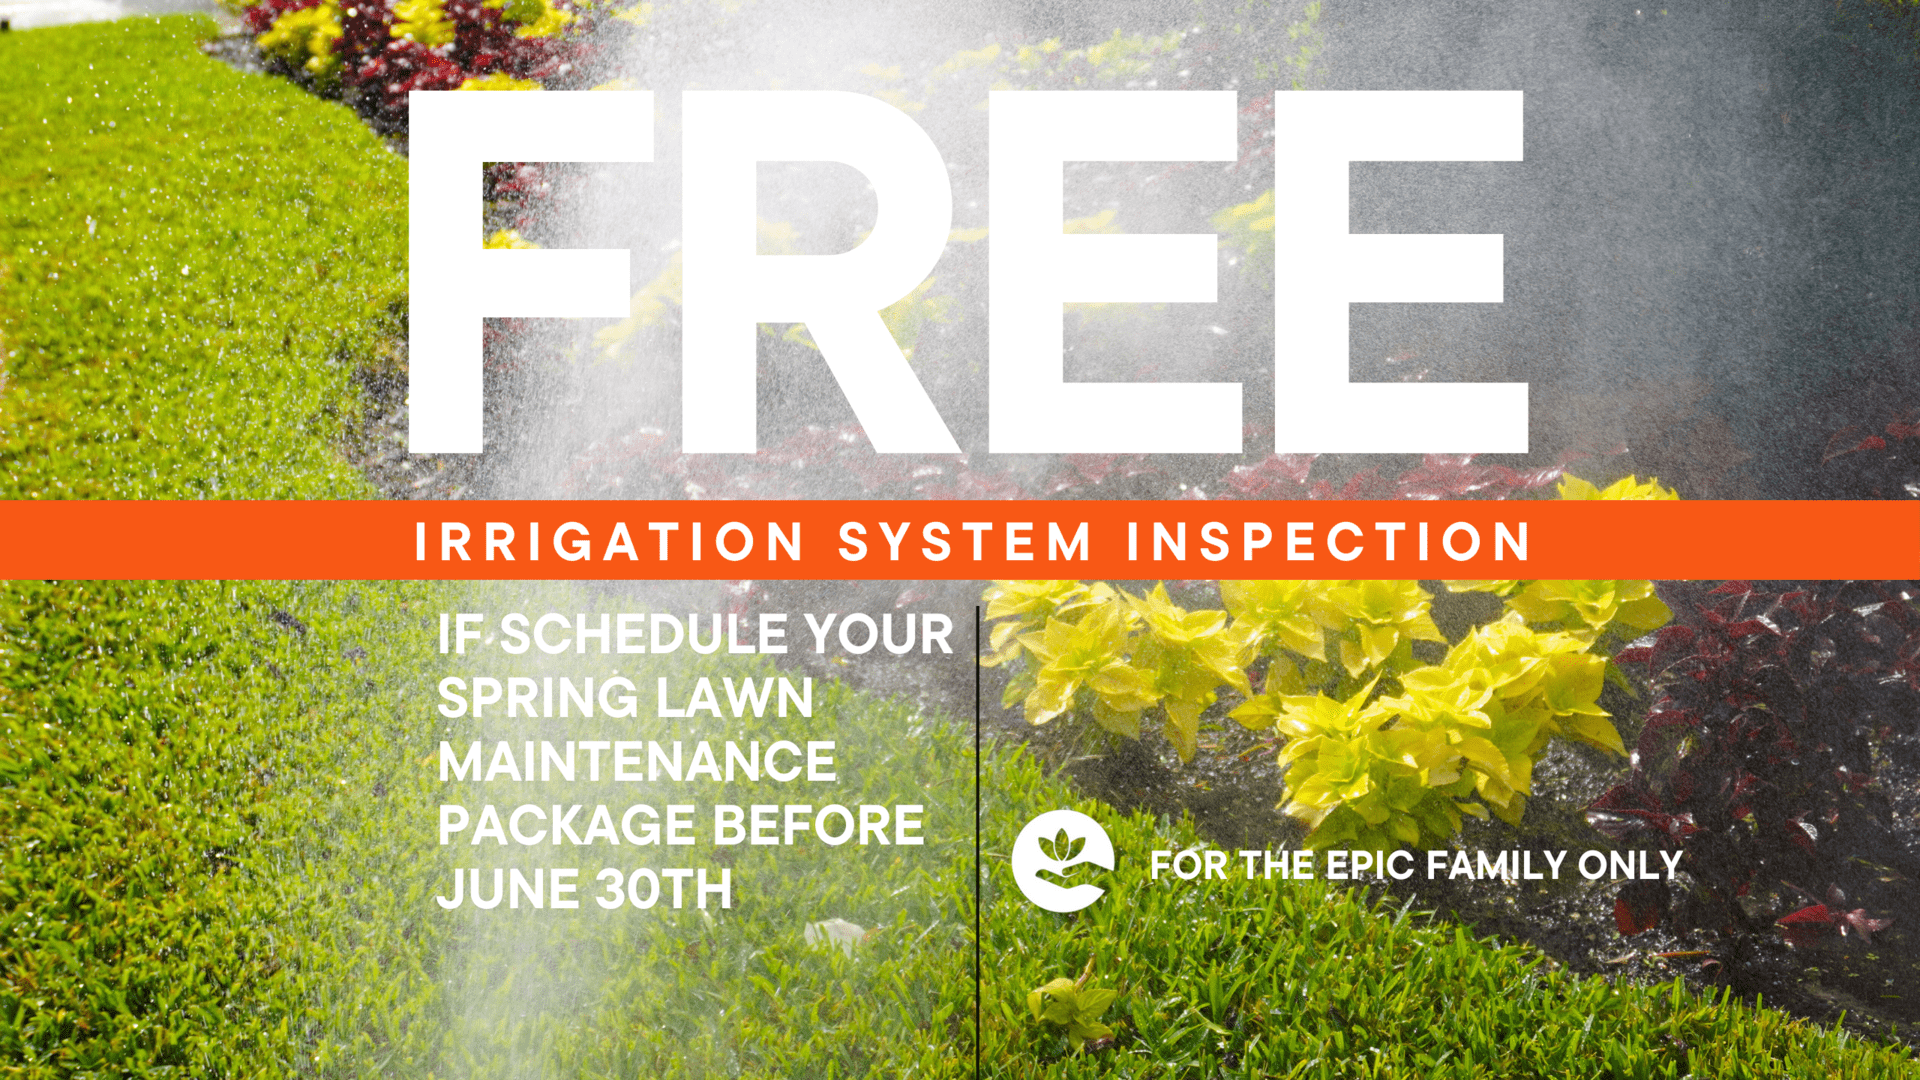 Free irrigation system inspection. If schedule your spring lawn maintenance package before june 30th